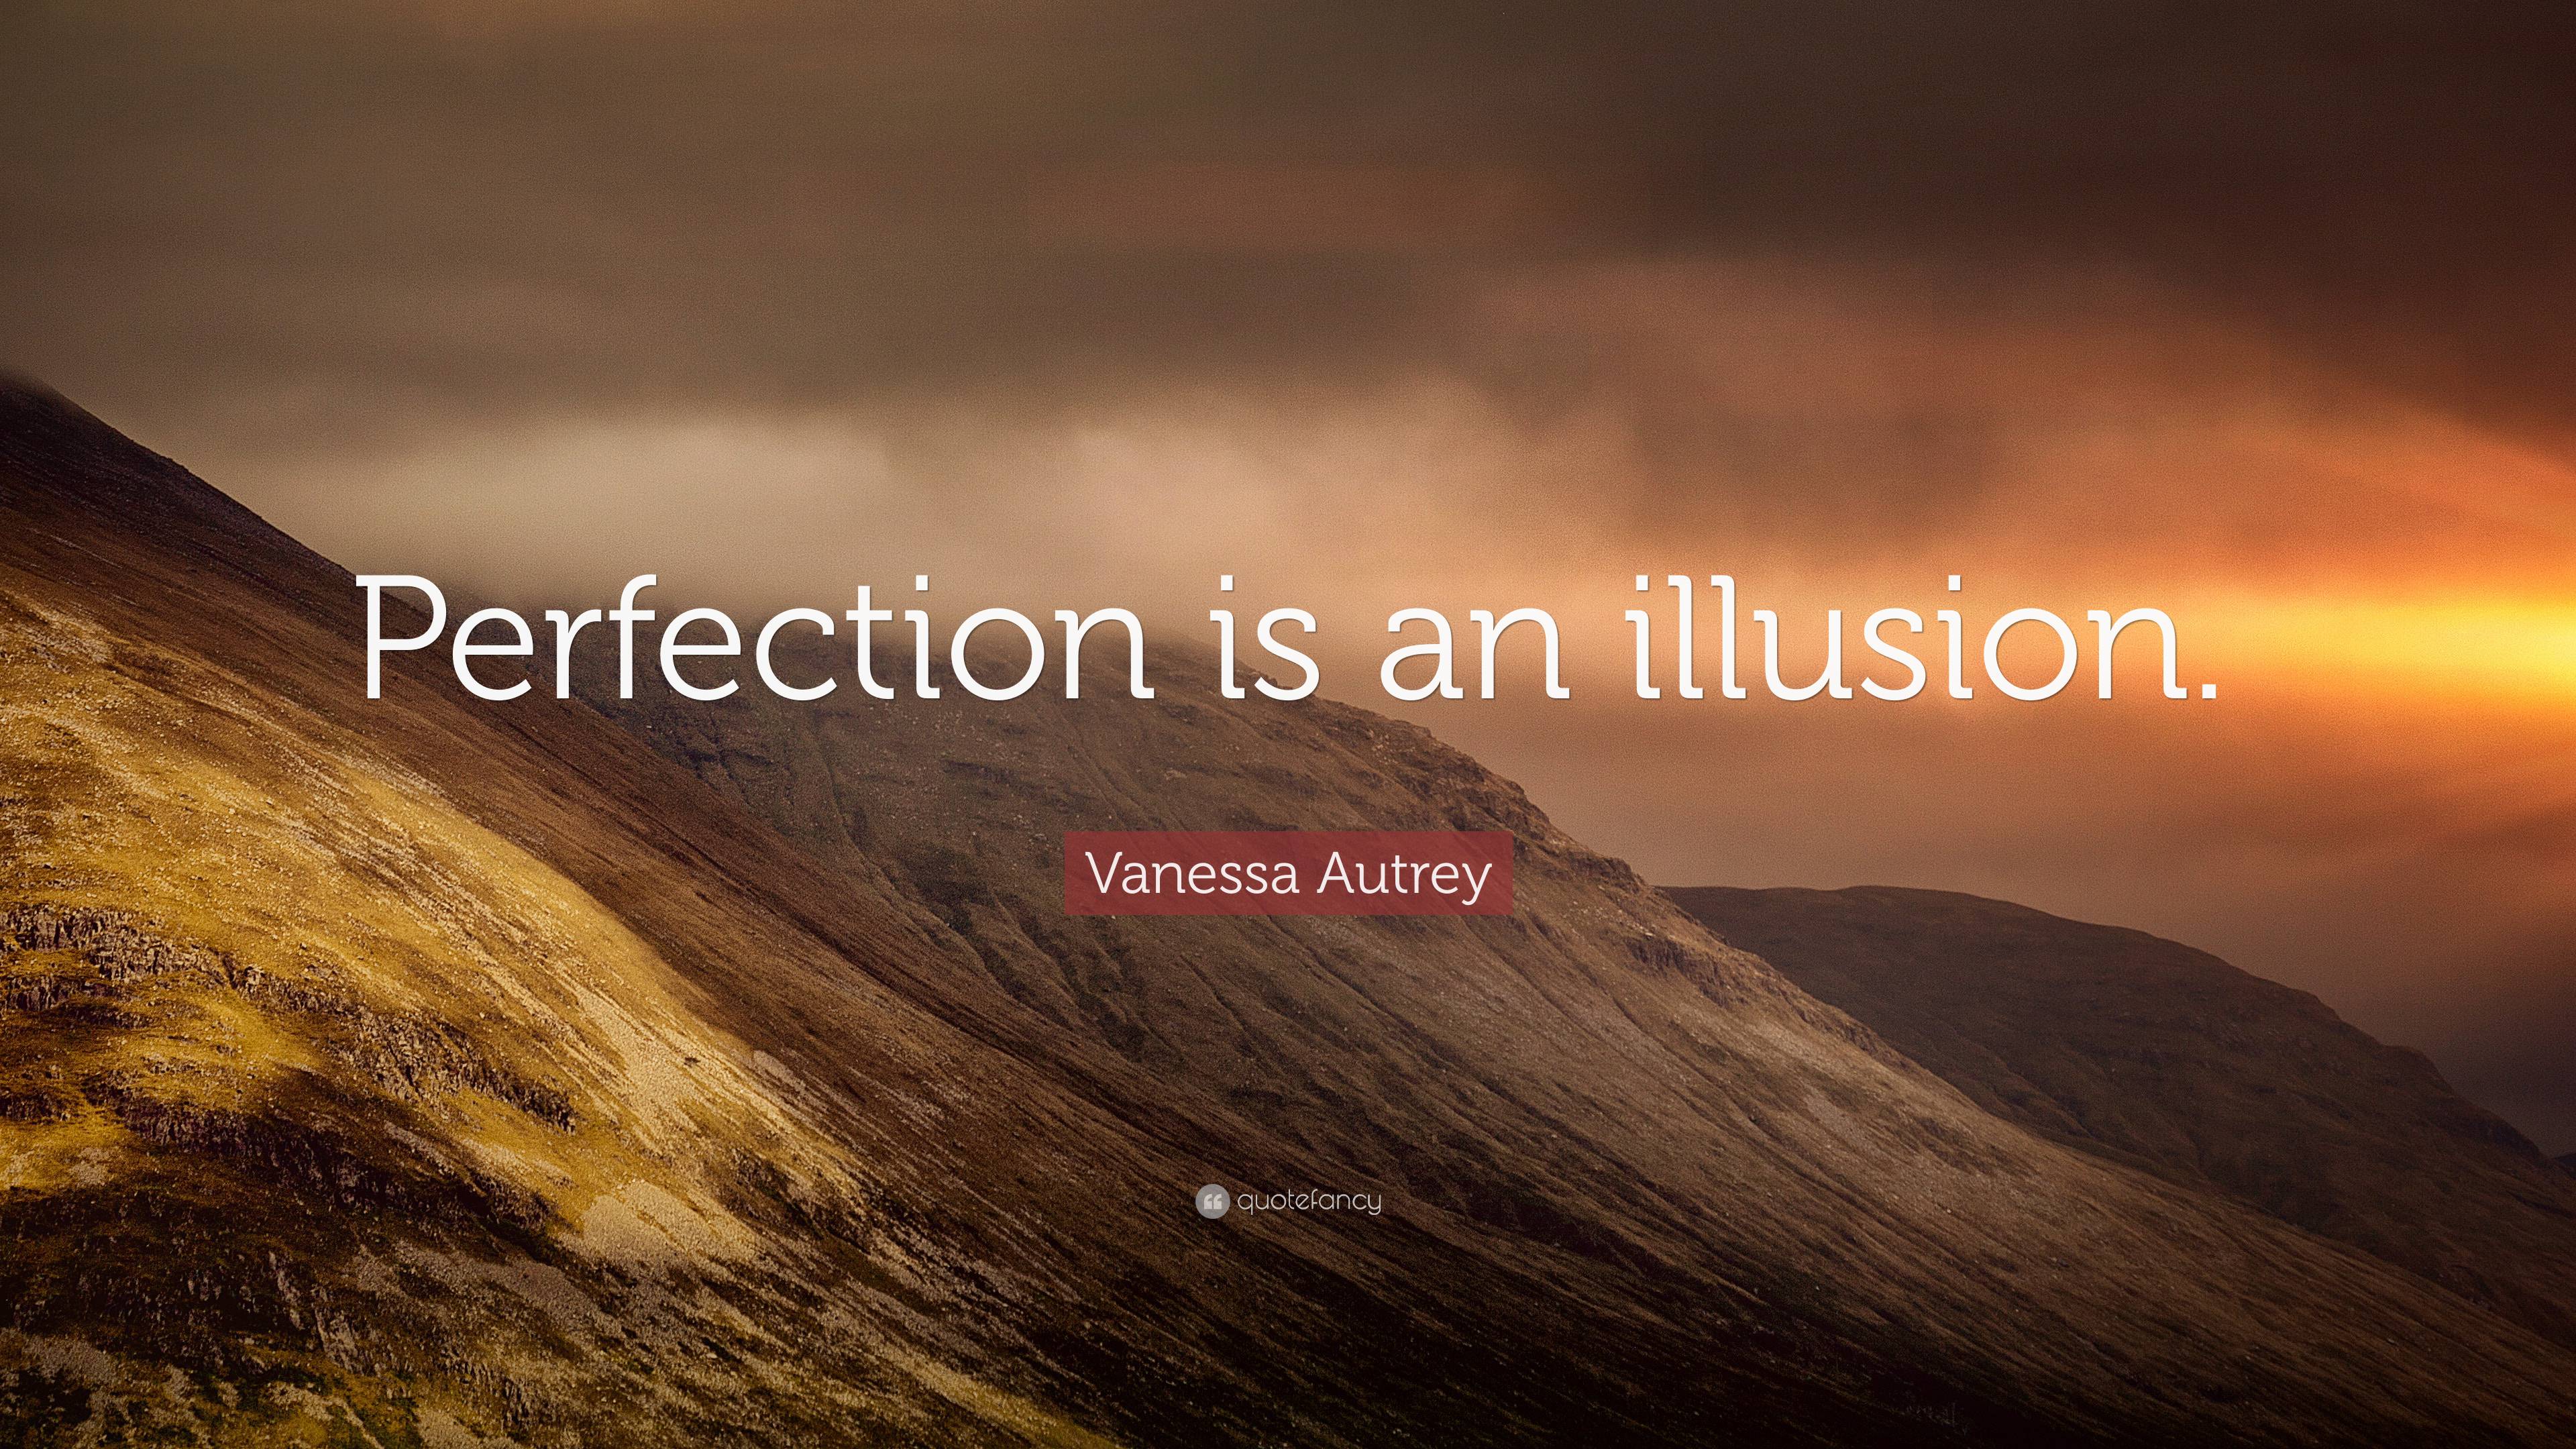 Vanessa Autrey Quote: “Perfection is an illusion.”